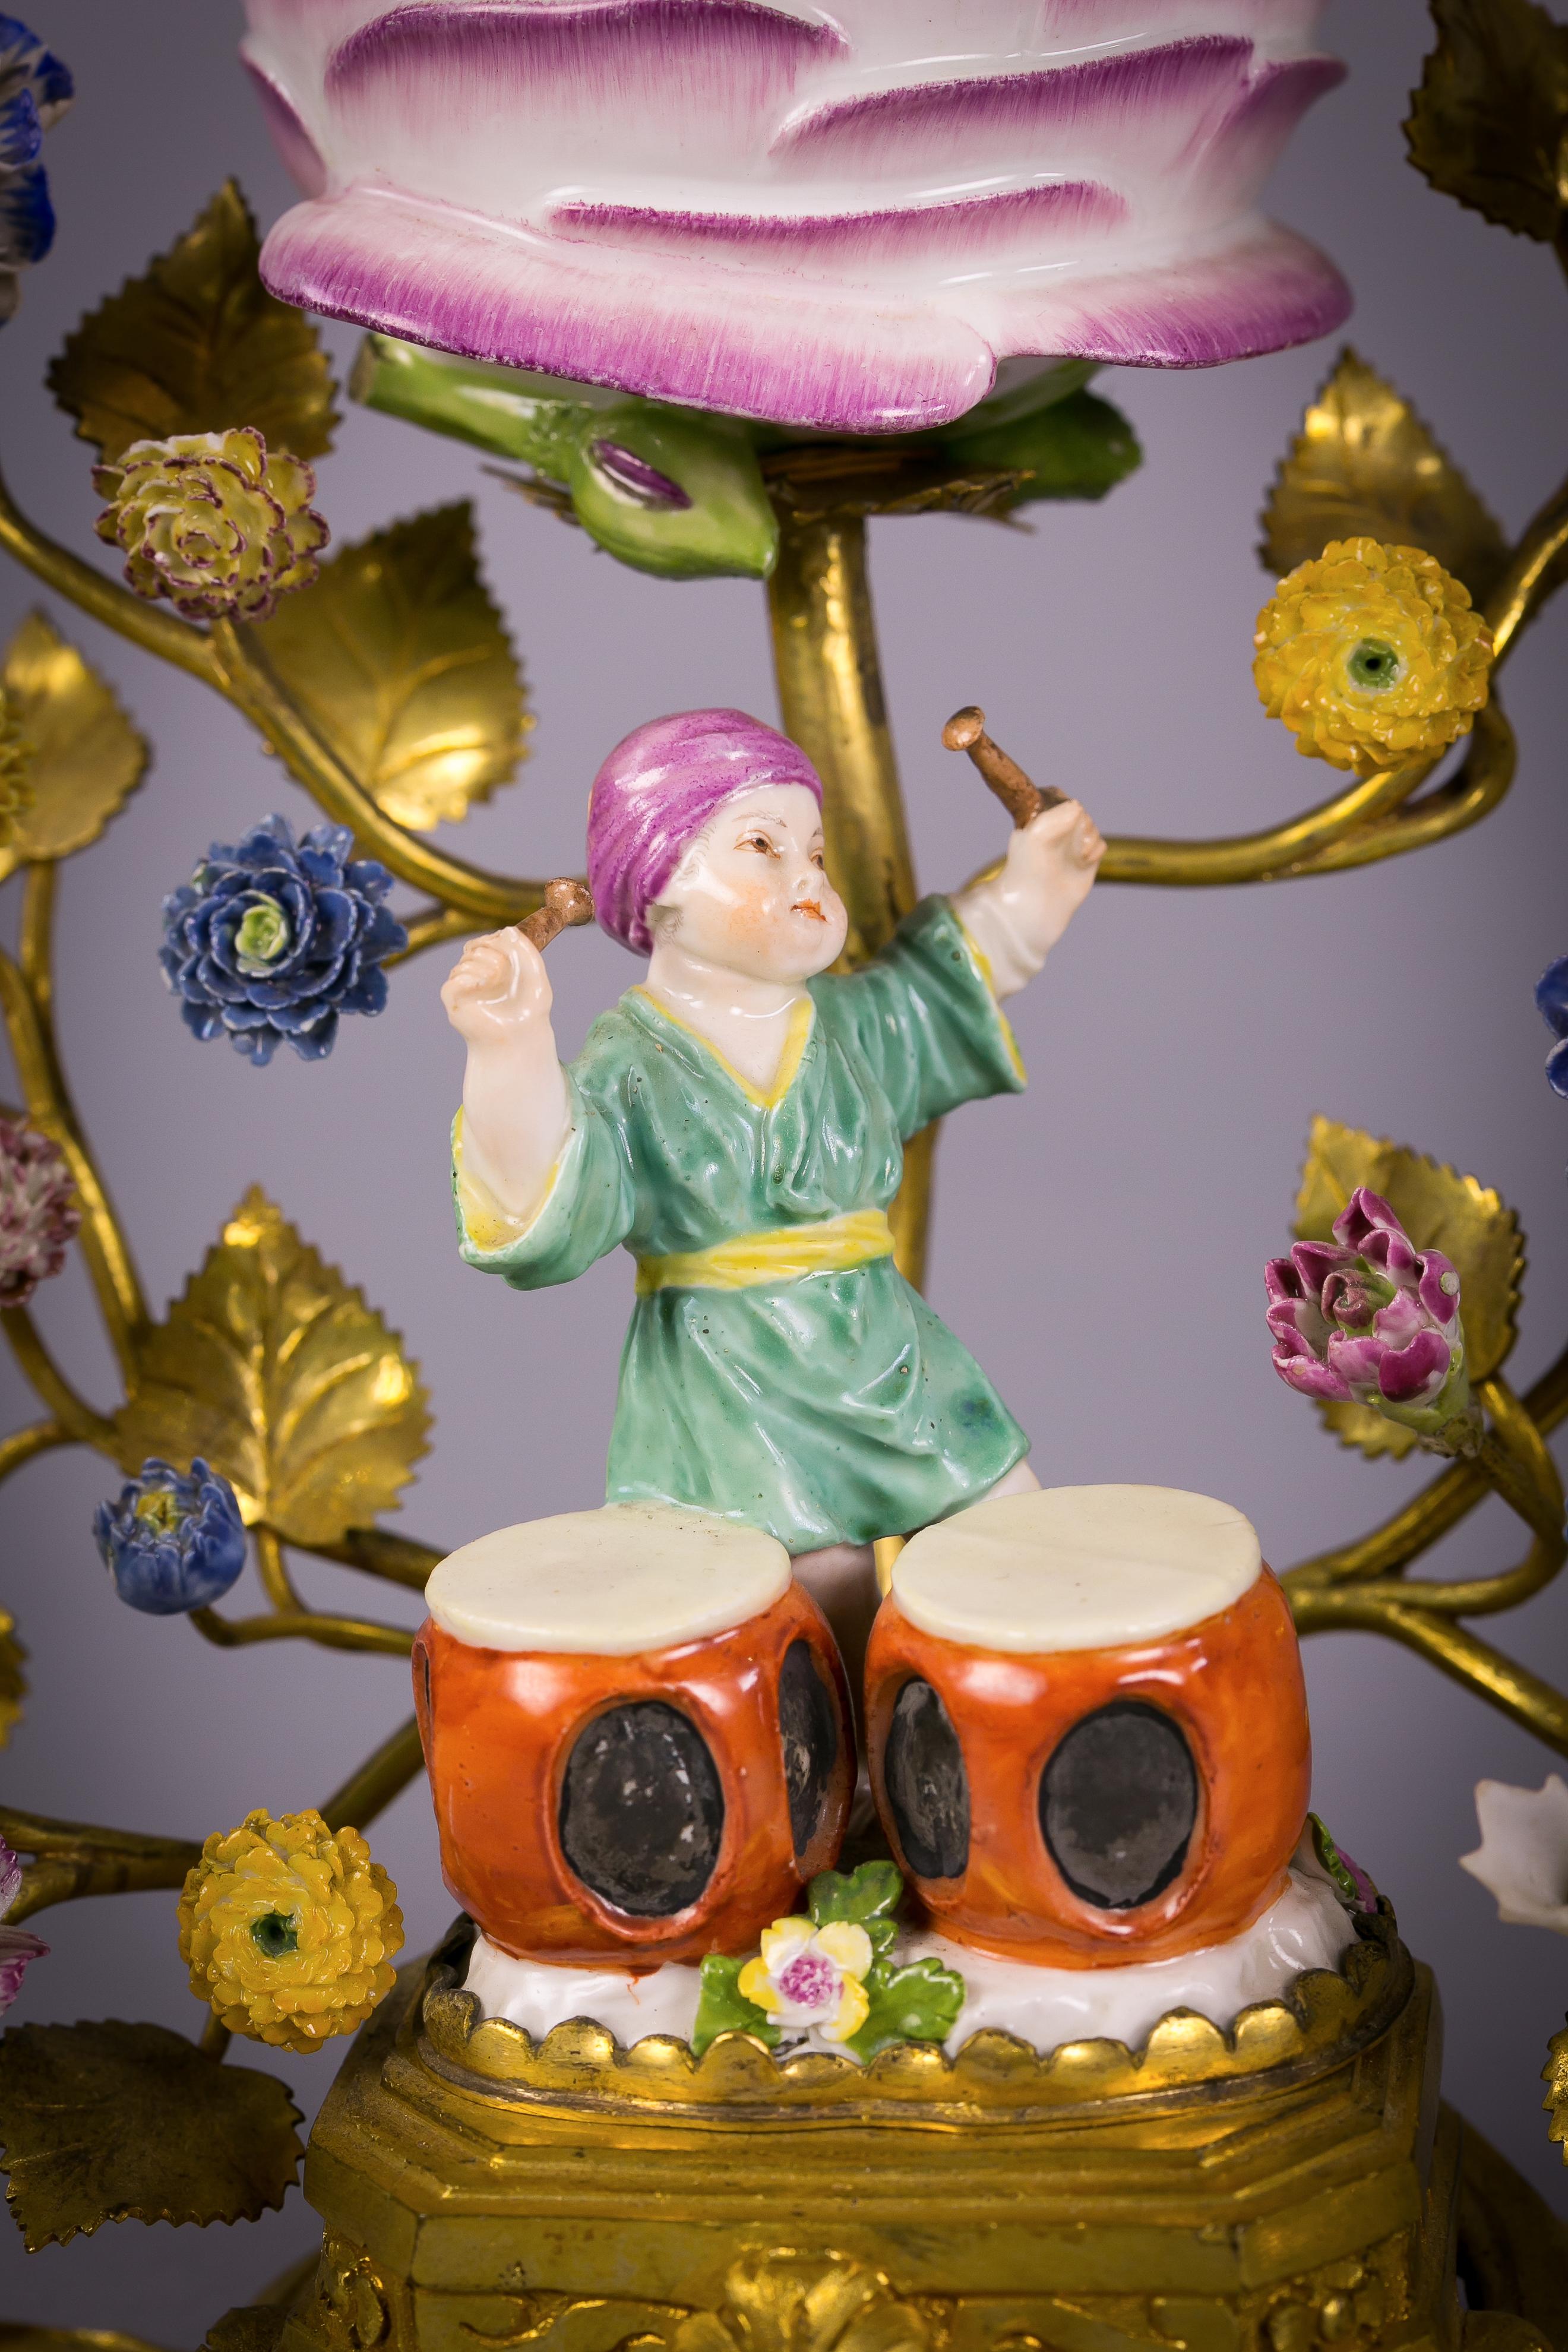 Each with a figure of a turbanned boy playing drums with porcelain flowers and a cabbage flower with a removable lid.